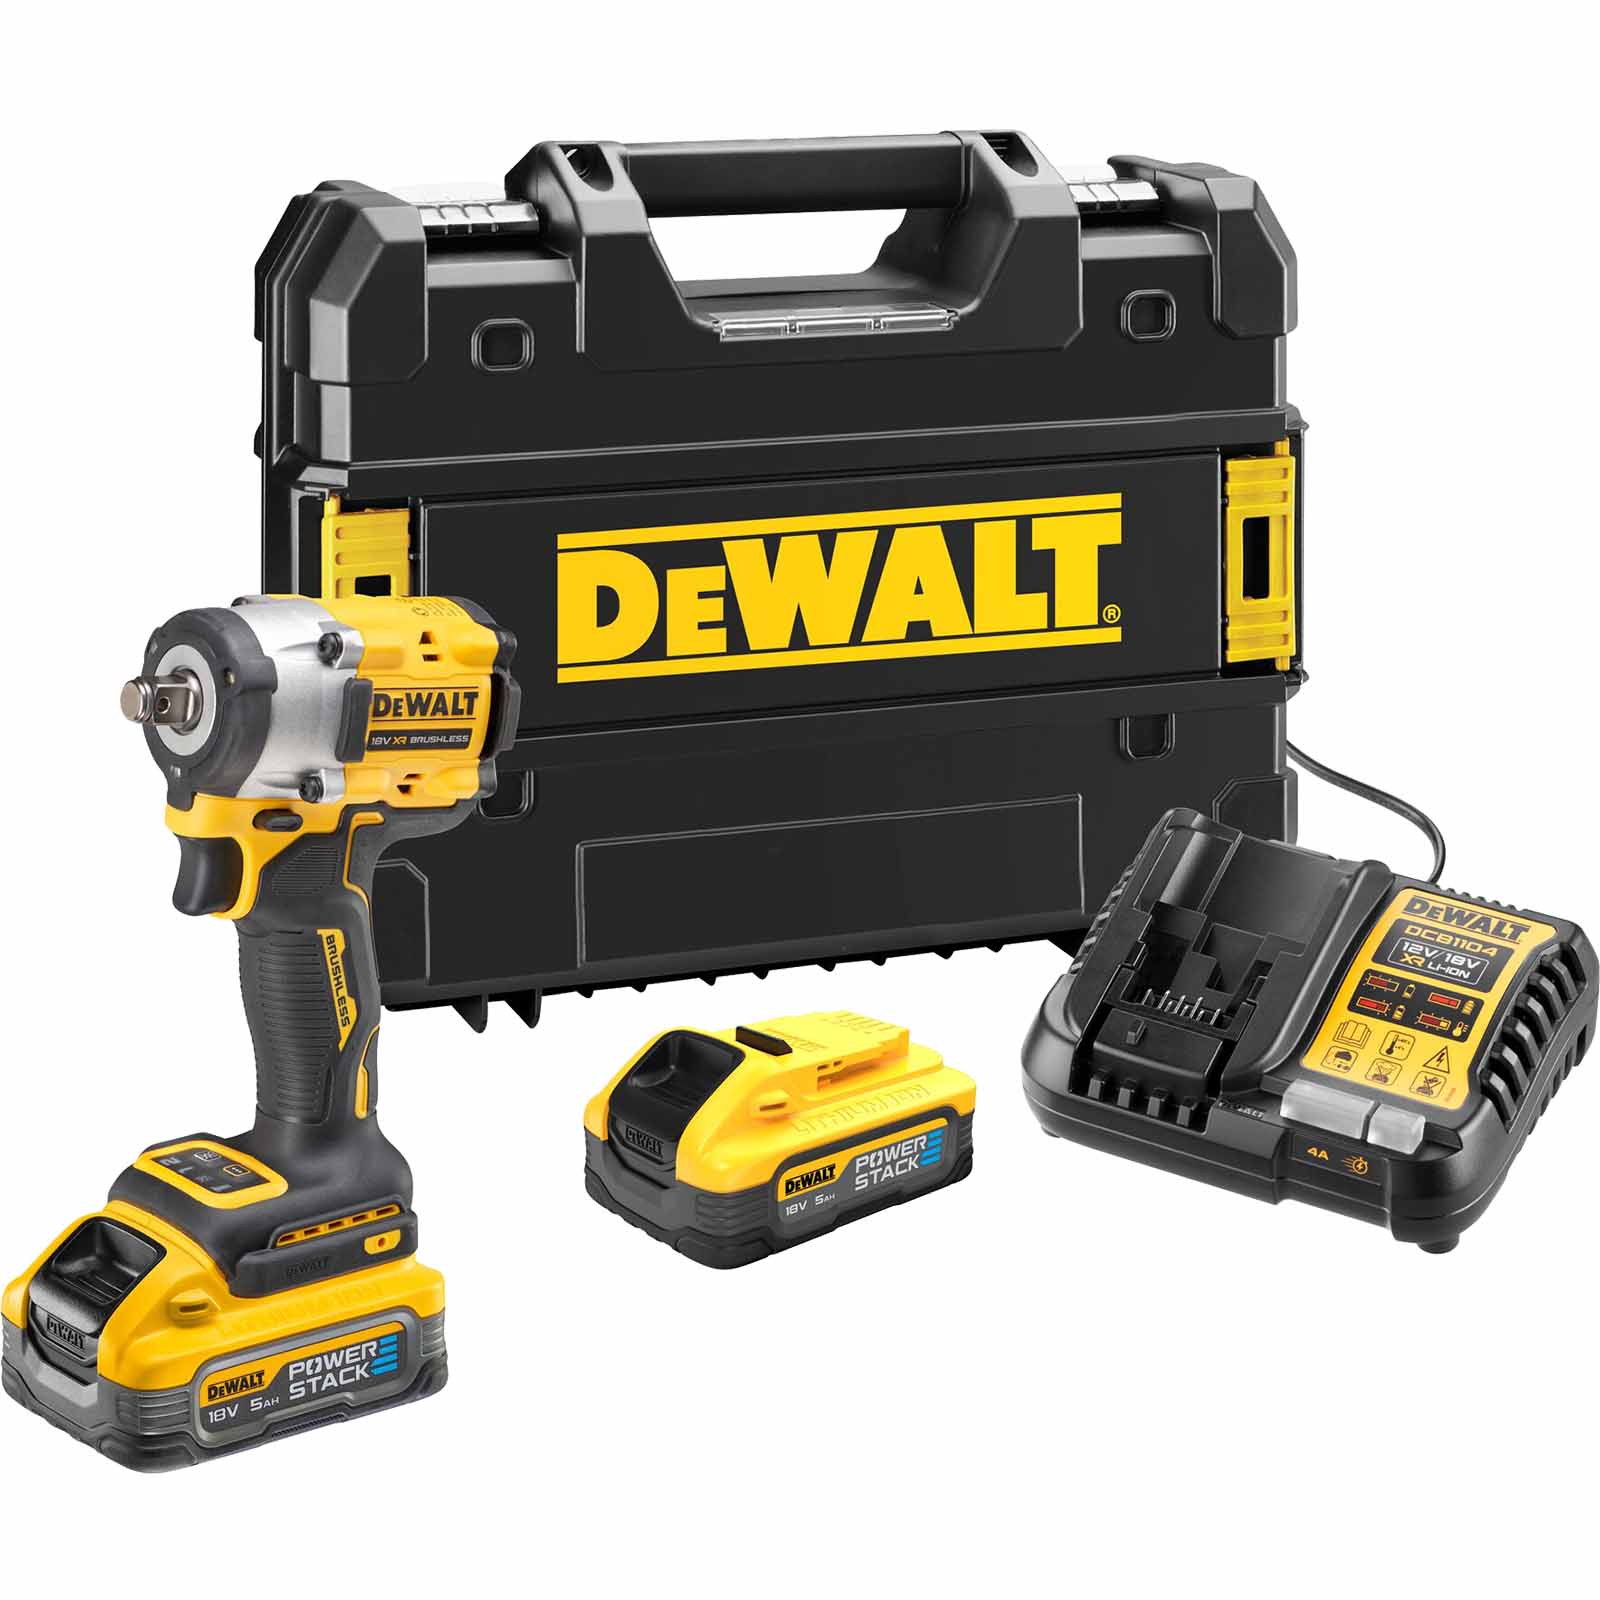 DeWalt DCF921 18v XR Cordless Brushless 1/2" Compact Impact Wrench 2 x 5ah Li-ion Powerstack Charger Case